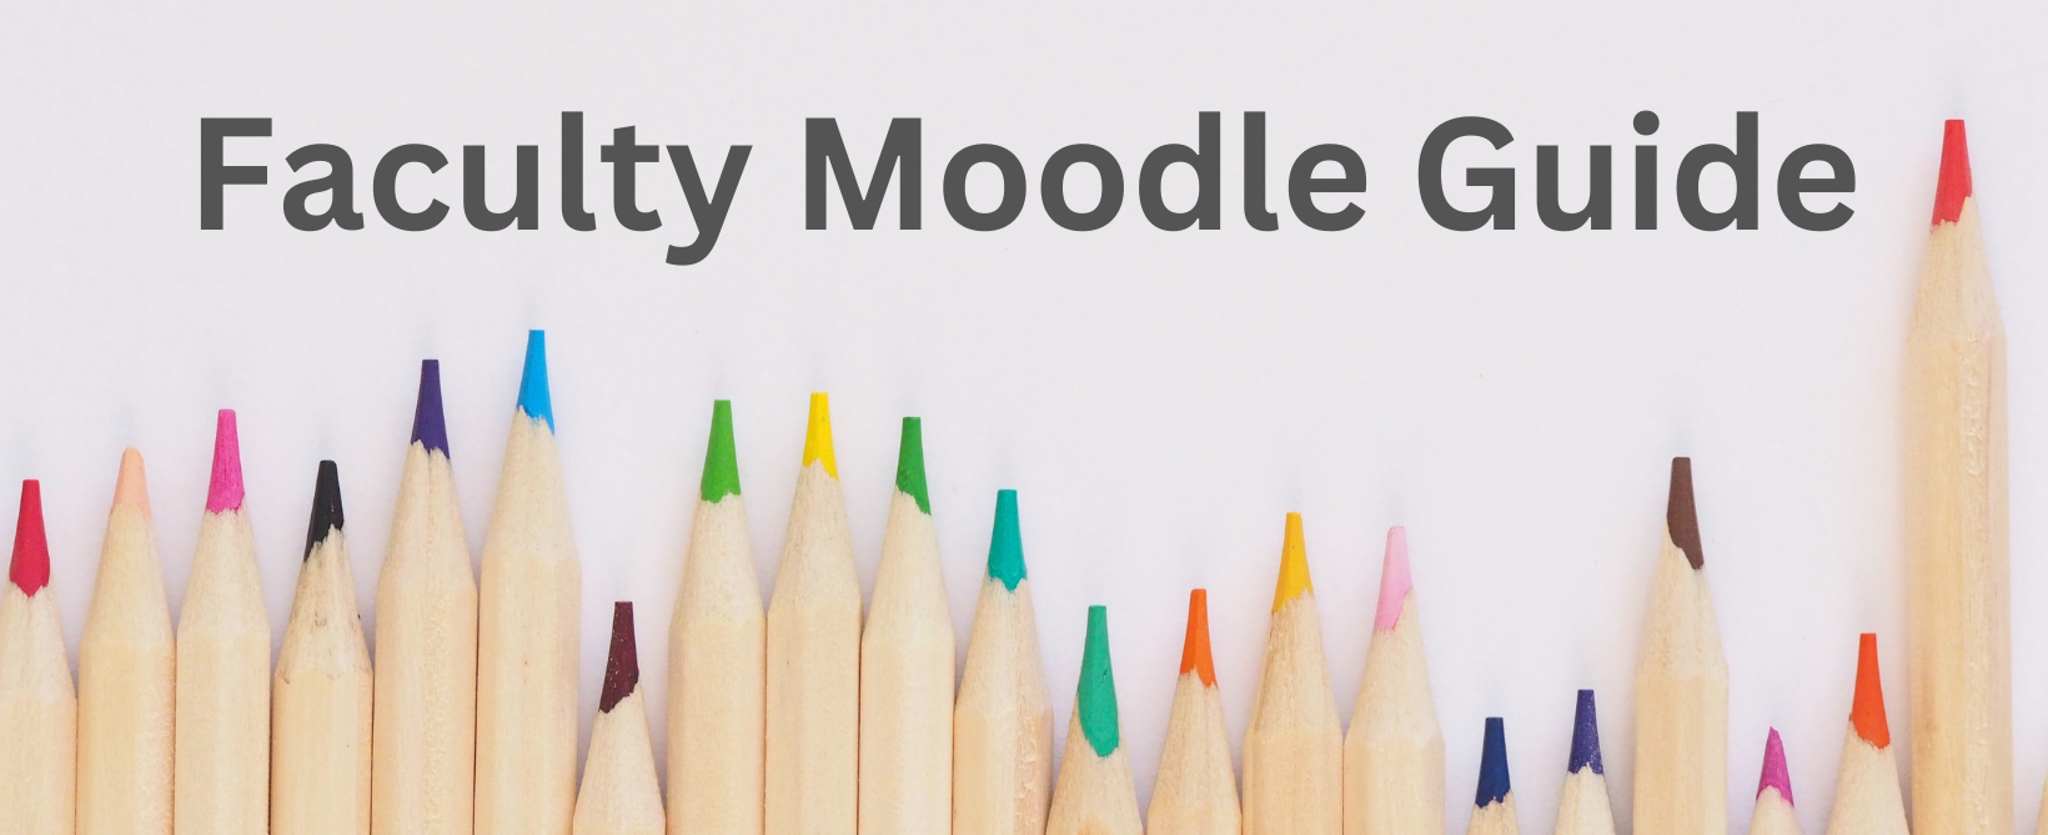 Text Faculty Moodle Guide, with coloured pencil tips below. 